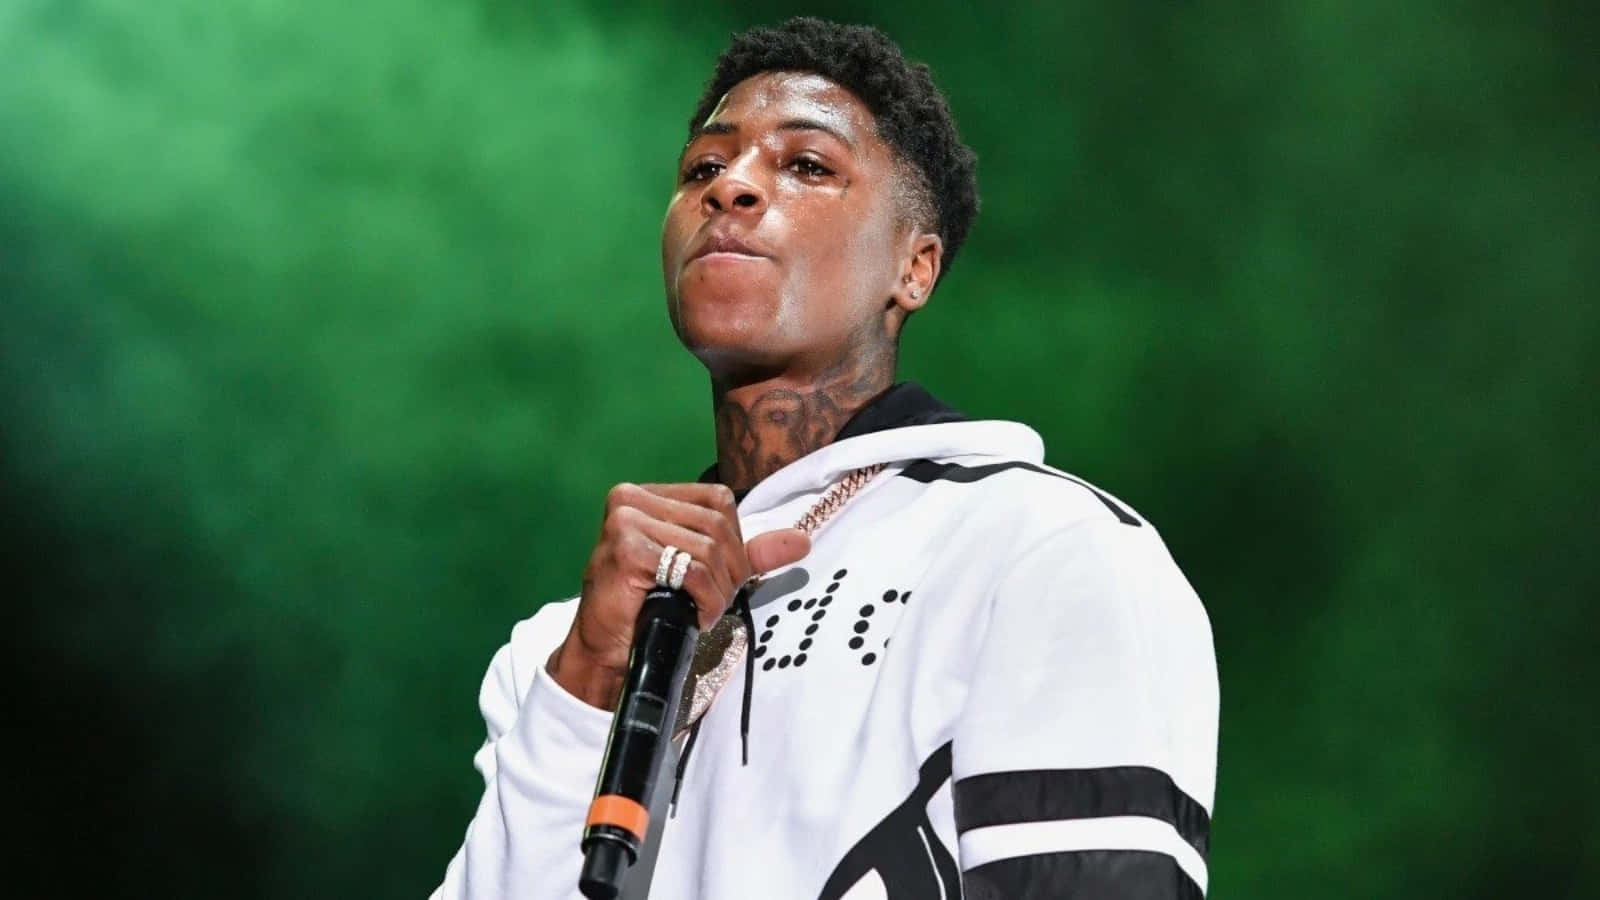 NBA YoungBoy living his life to the fullest